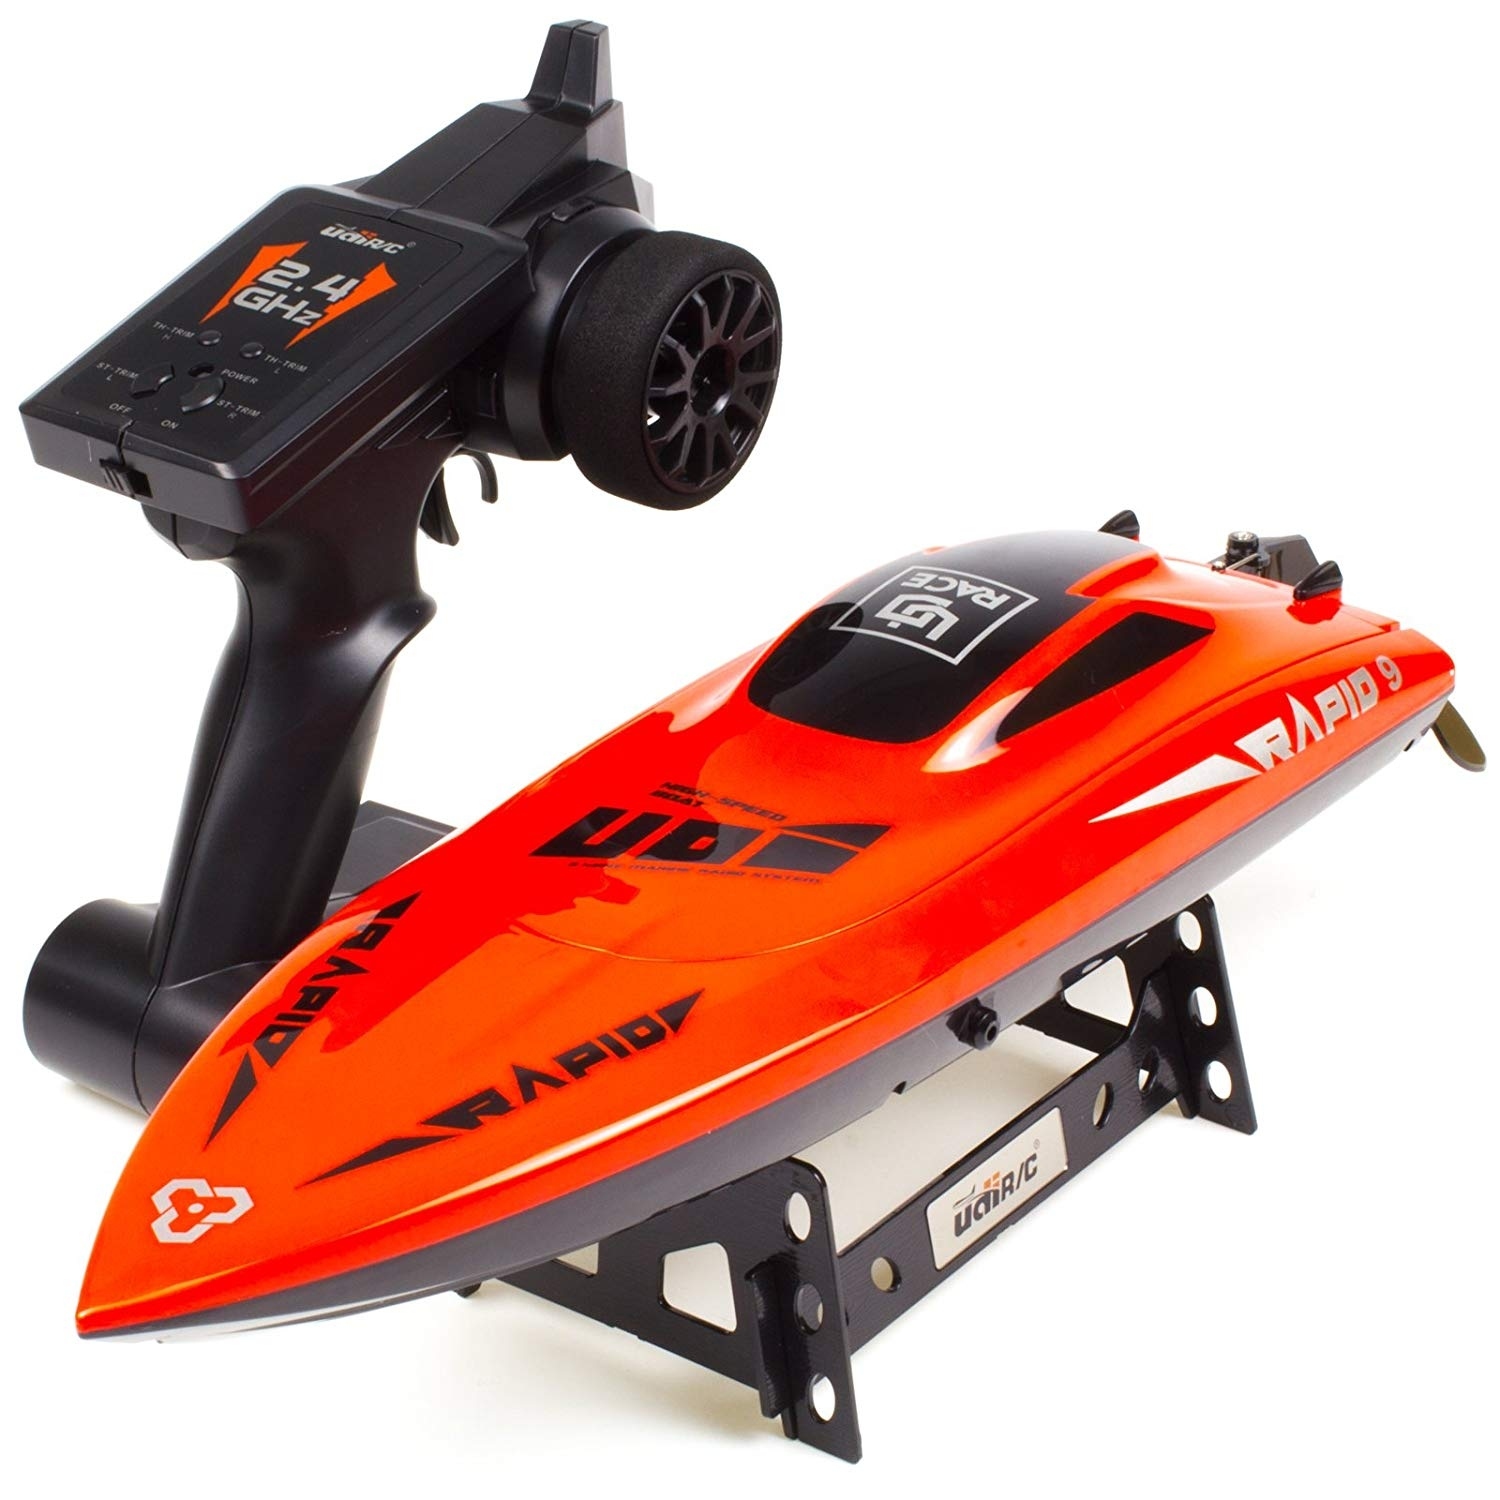 UDIRC RC Boat UDI009 2.4Ghz Remote Control High Speed Electronic Racing